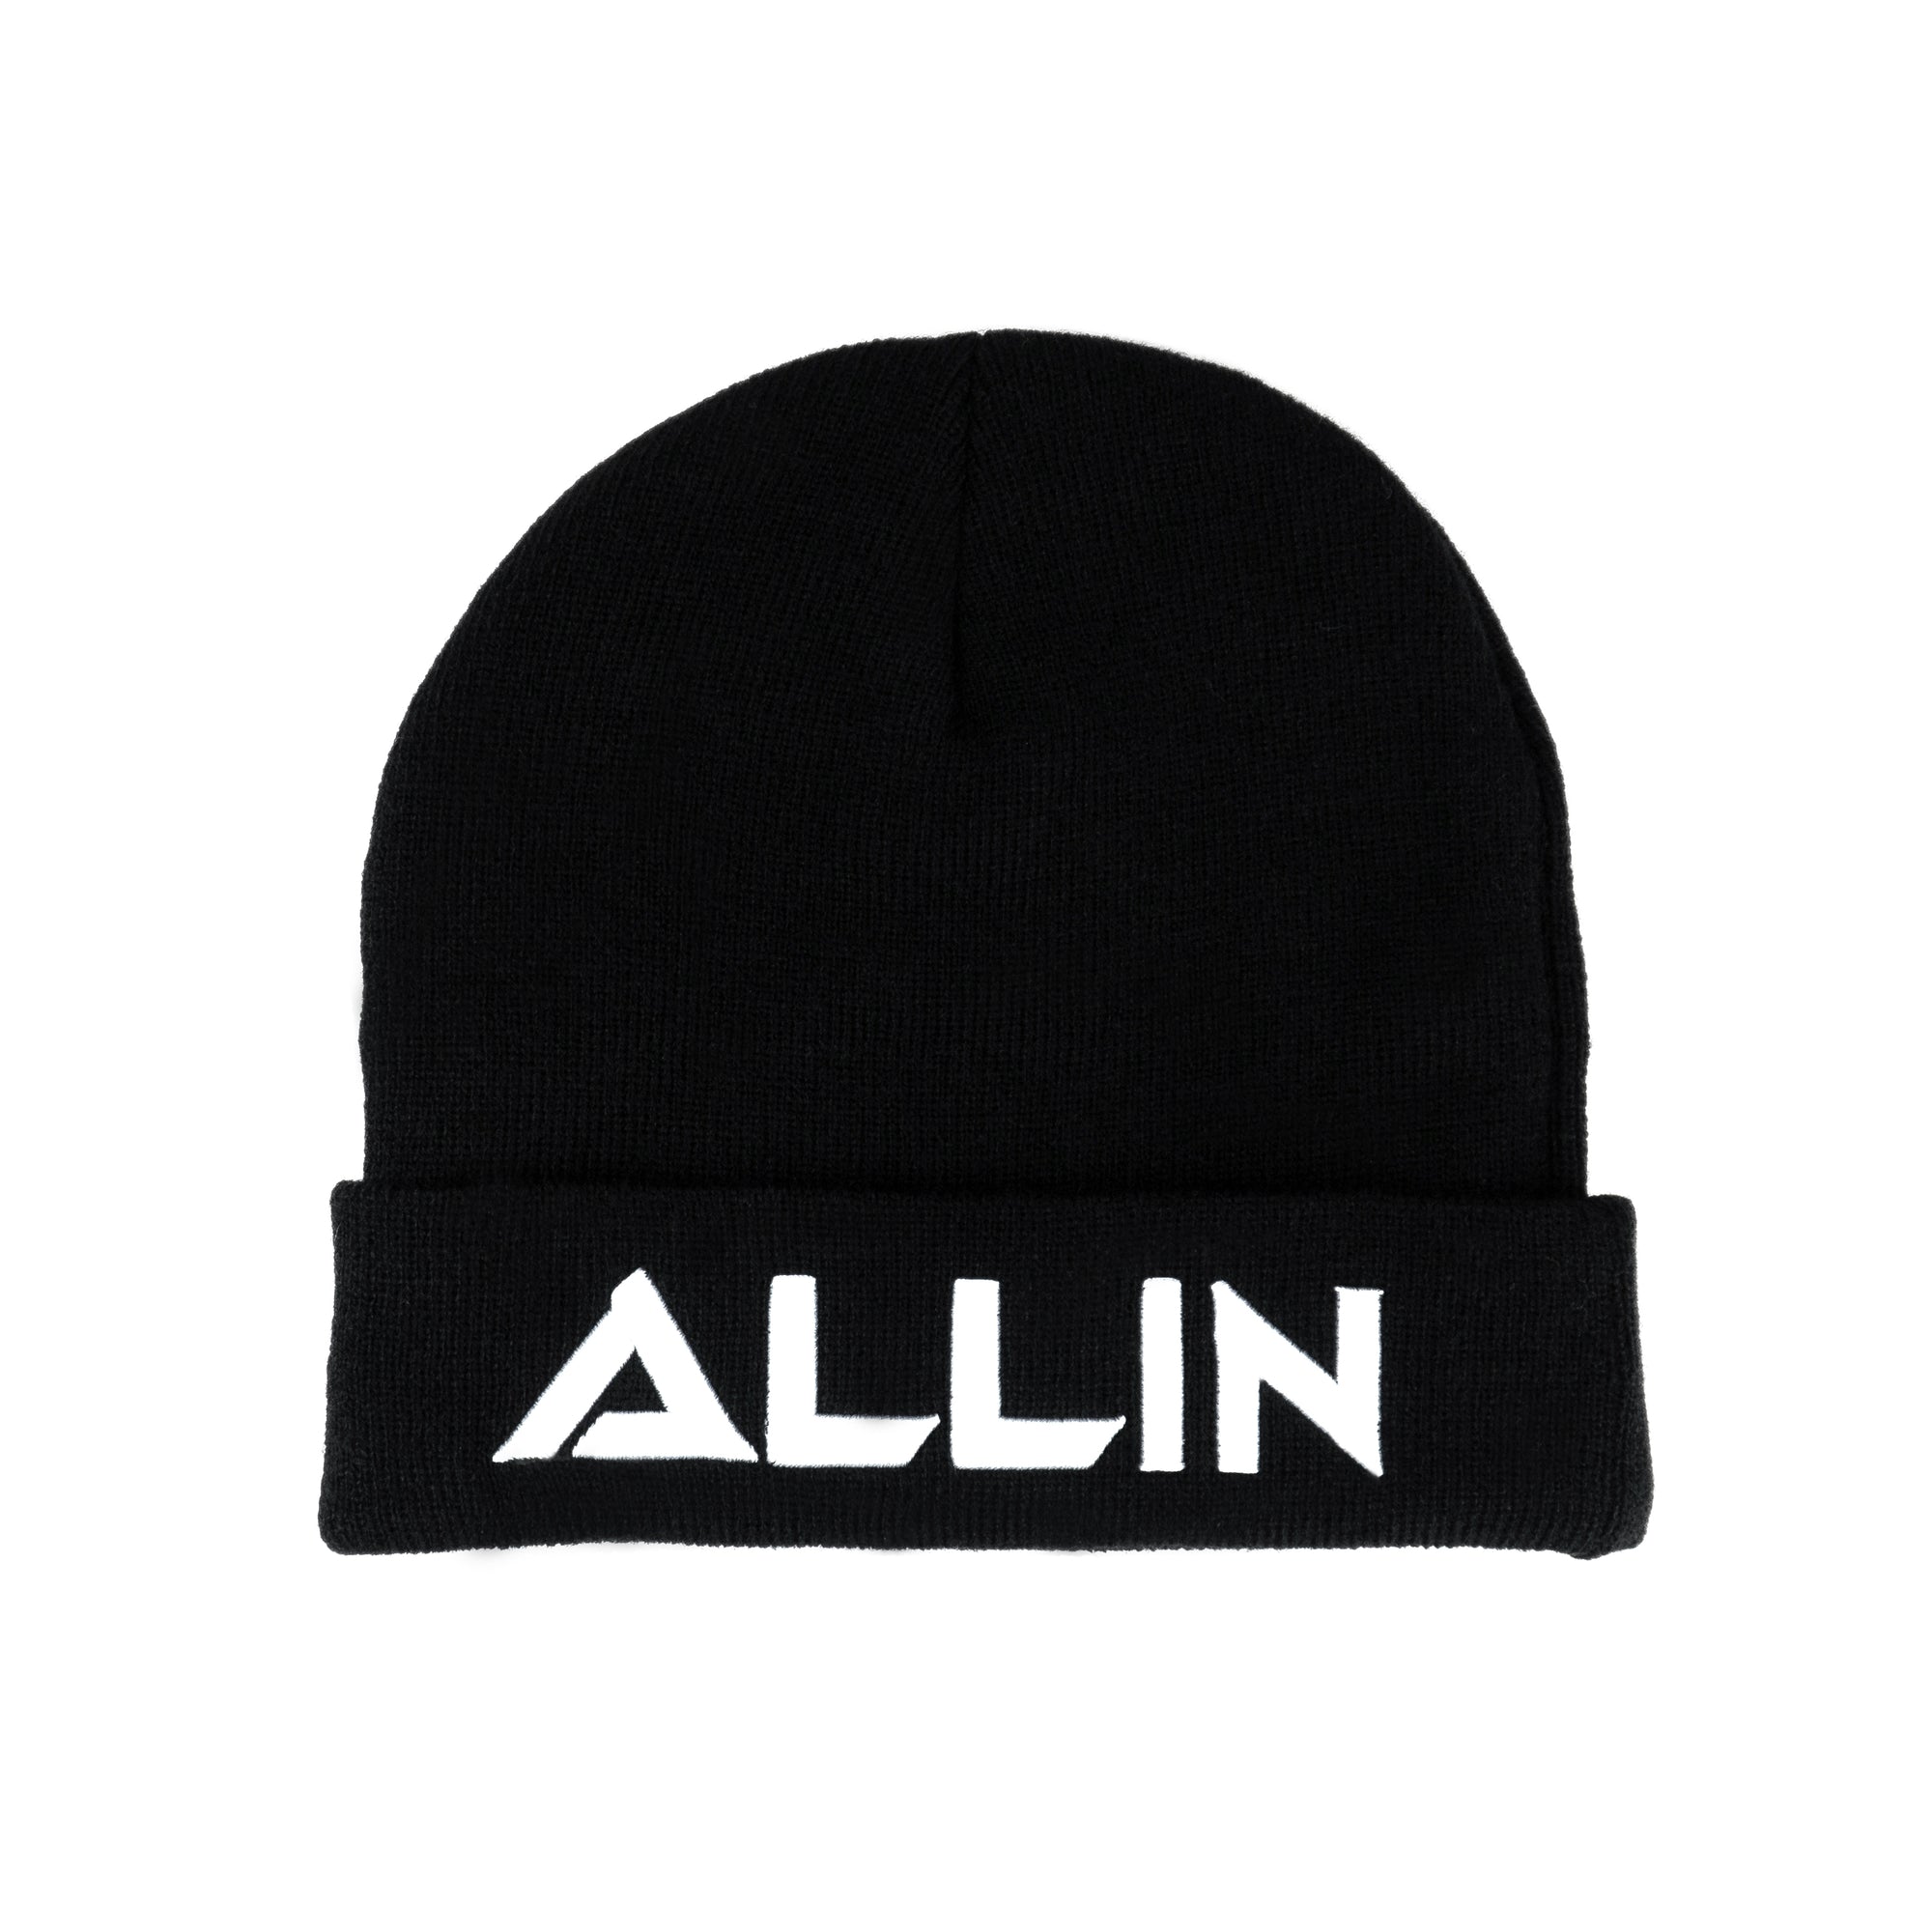 Embroidered Beanie Black - Front